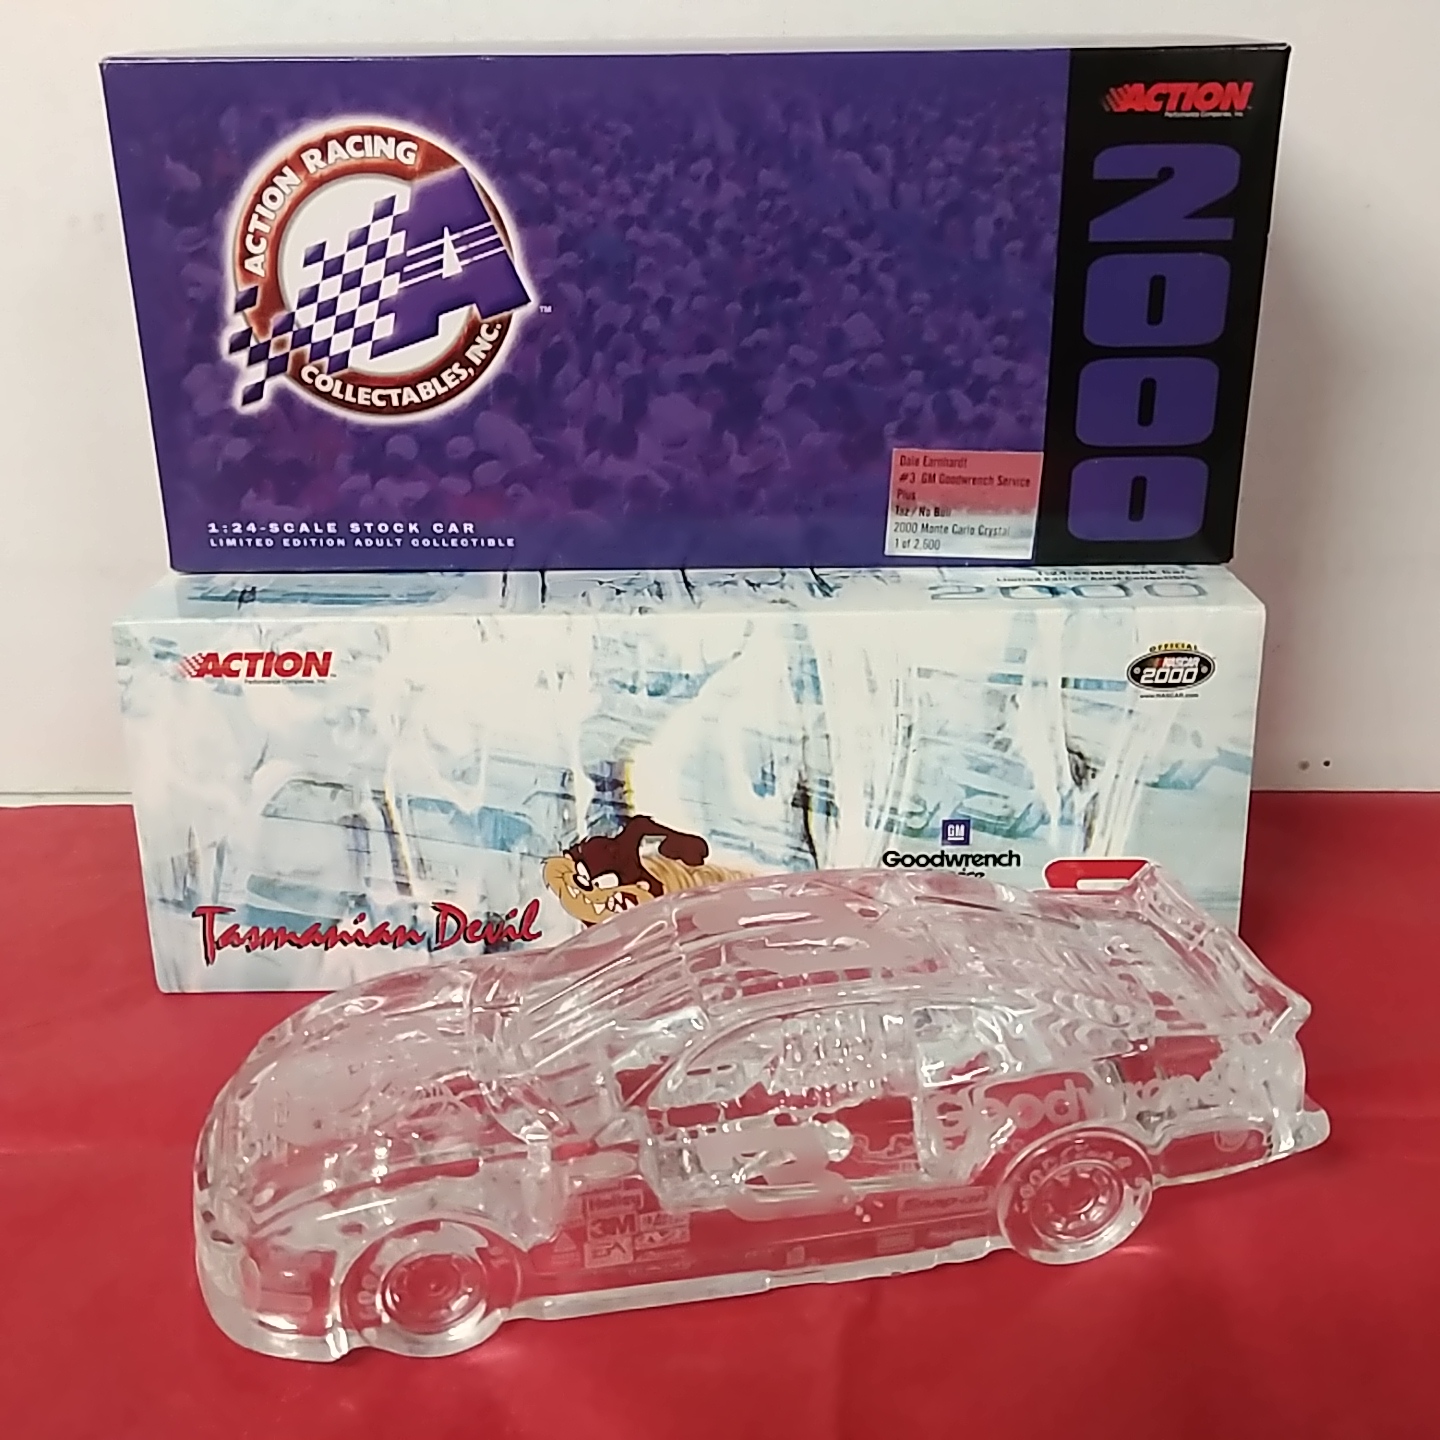 2000 Dale Earnhardt 1/24th Goodwrench "Taz" Crystal Monte Carlo